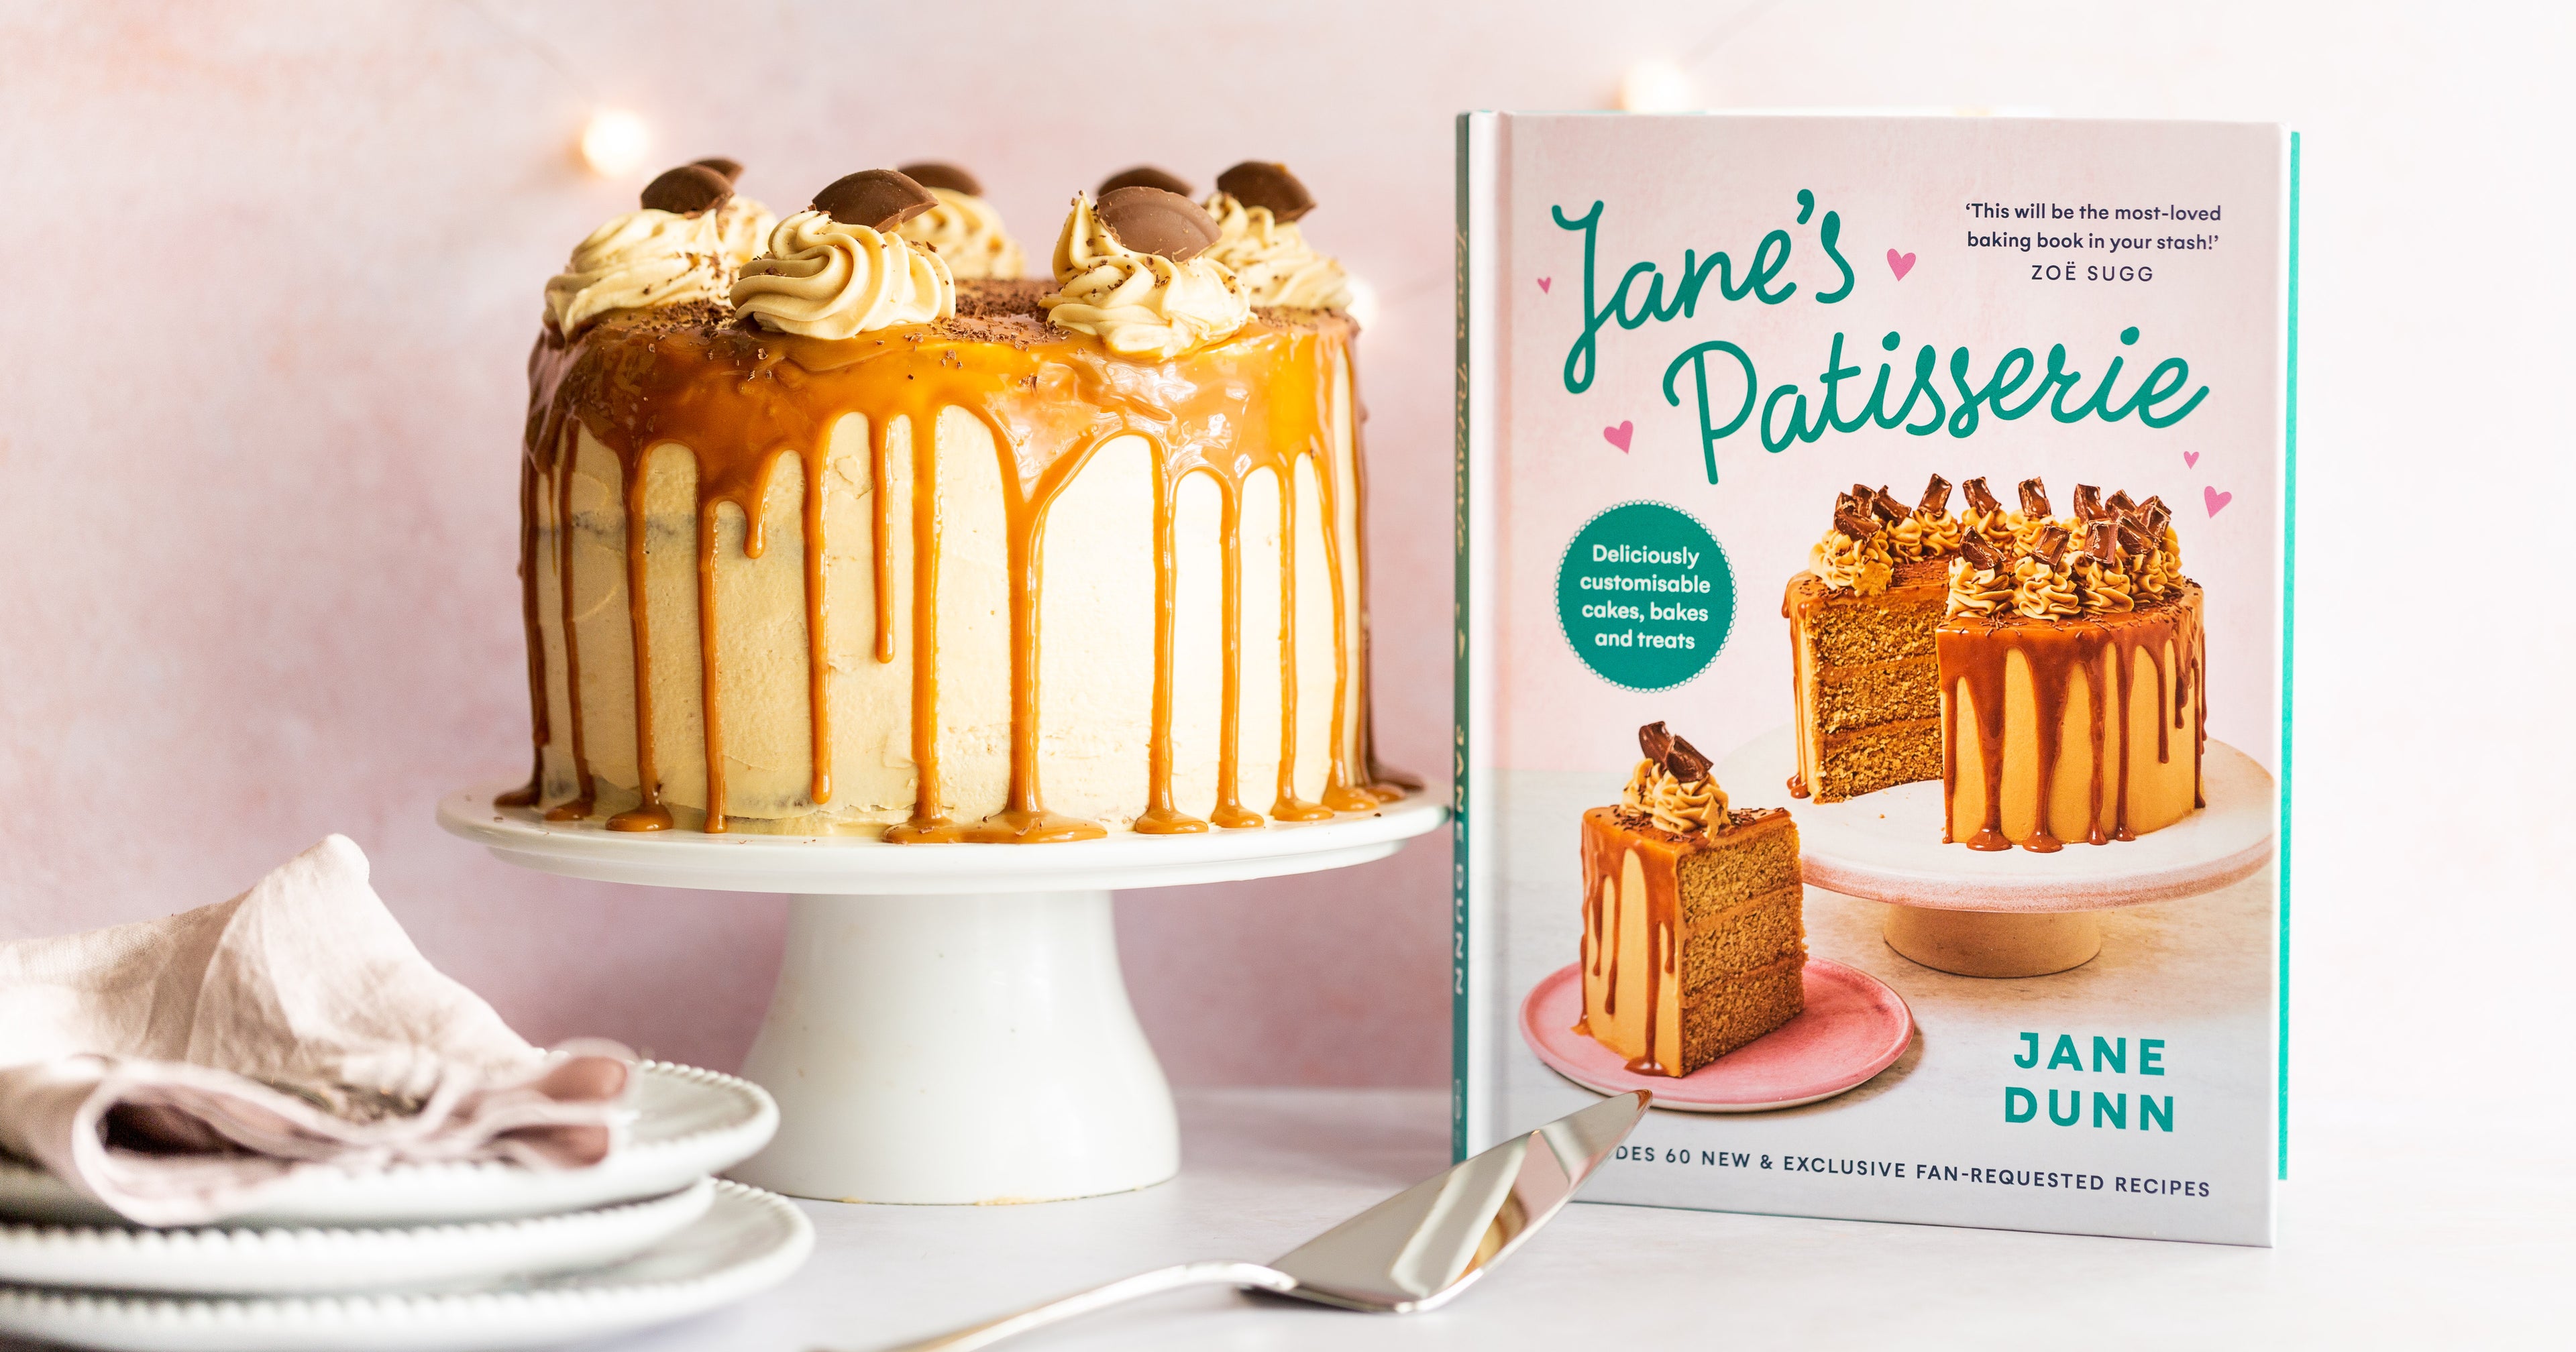 Cake on cake stand with caramel dripping down the side. A stack of white plates. A cake slice and a recipe book